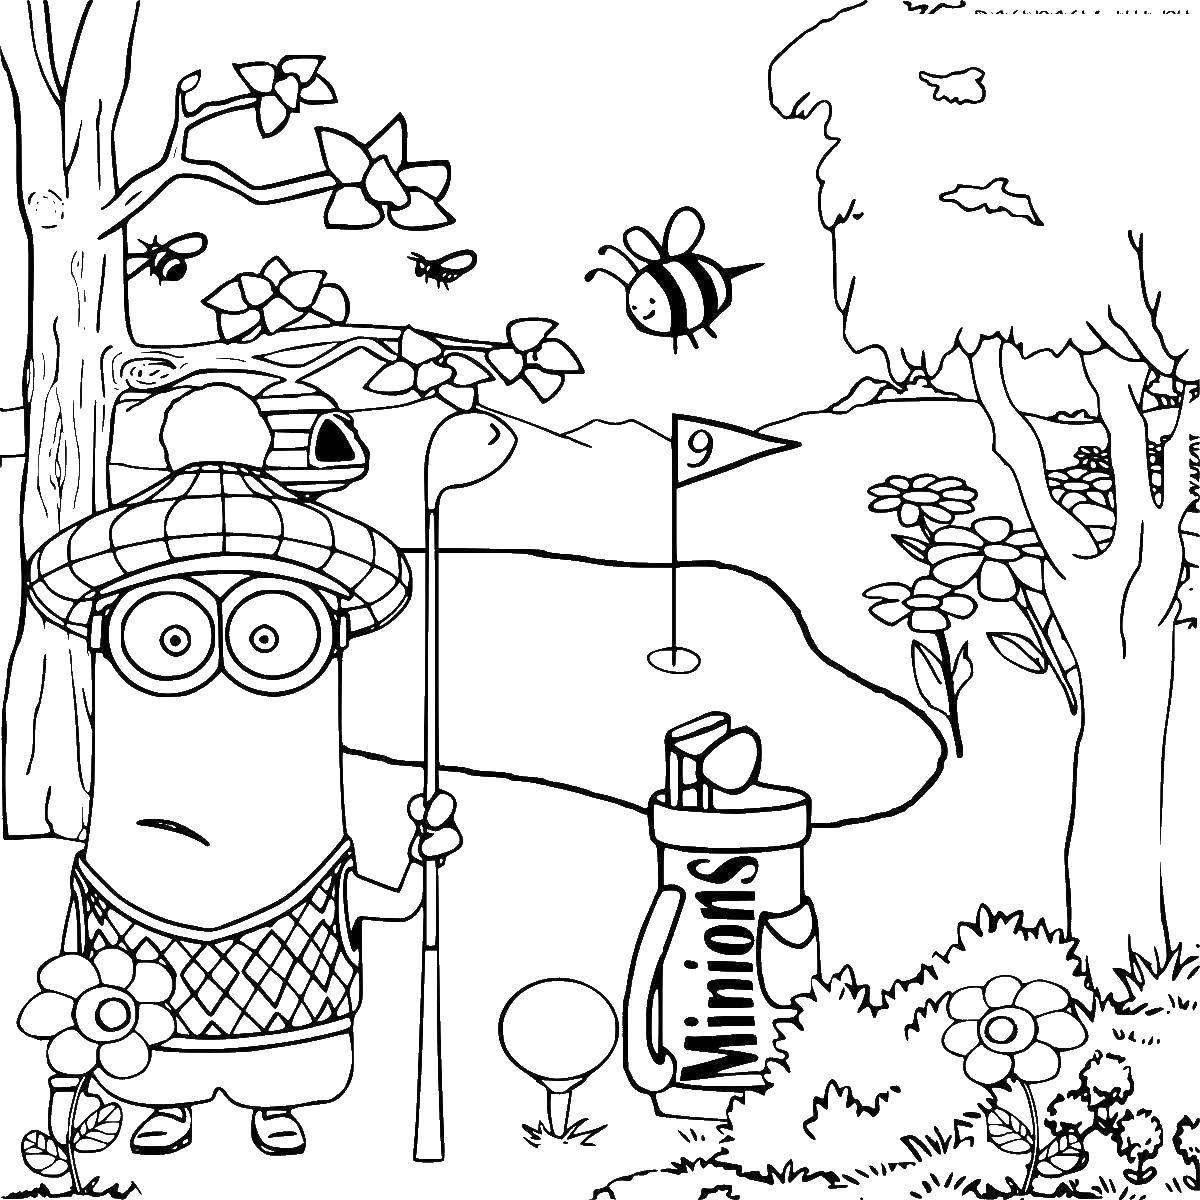 Coloring Minion playing Golf. Category the minions. Tags:  minion.